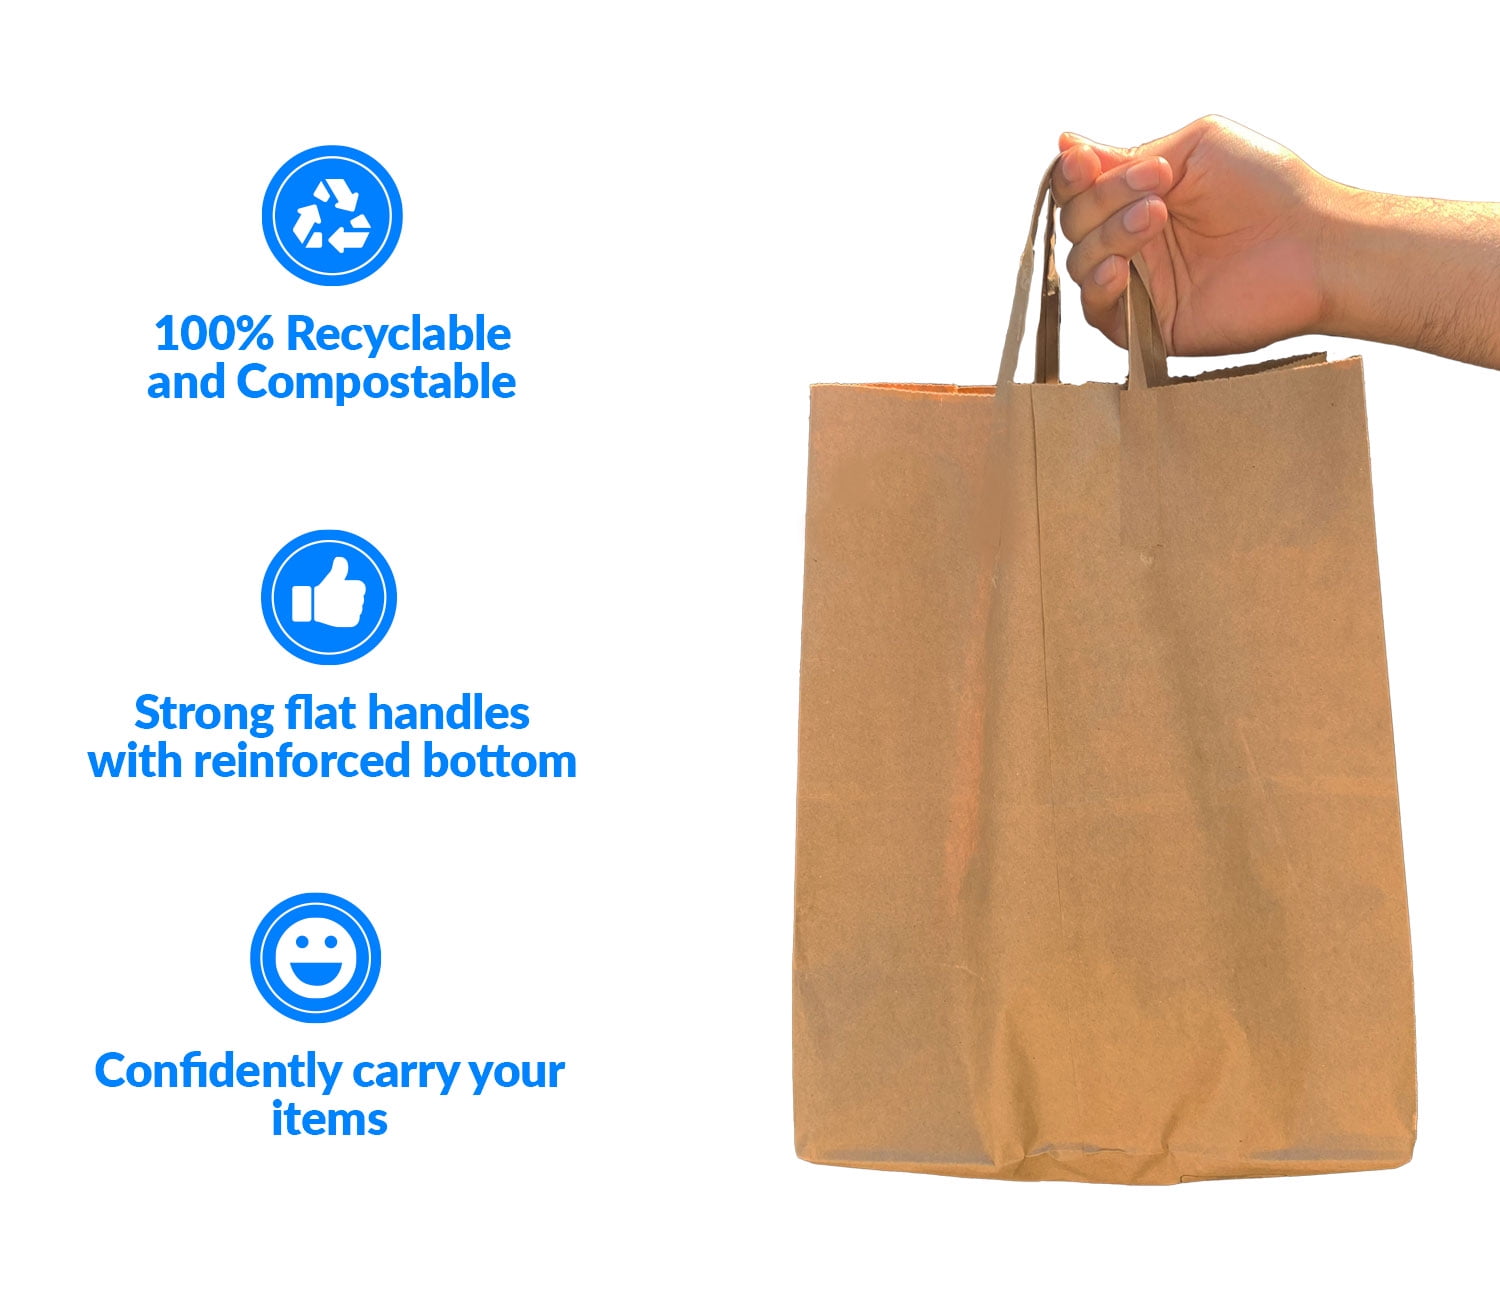 Duro Brown Printed 100% Recycled Shopping Bag with Handles 12 x 7 x 17 -  300/Bundle